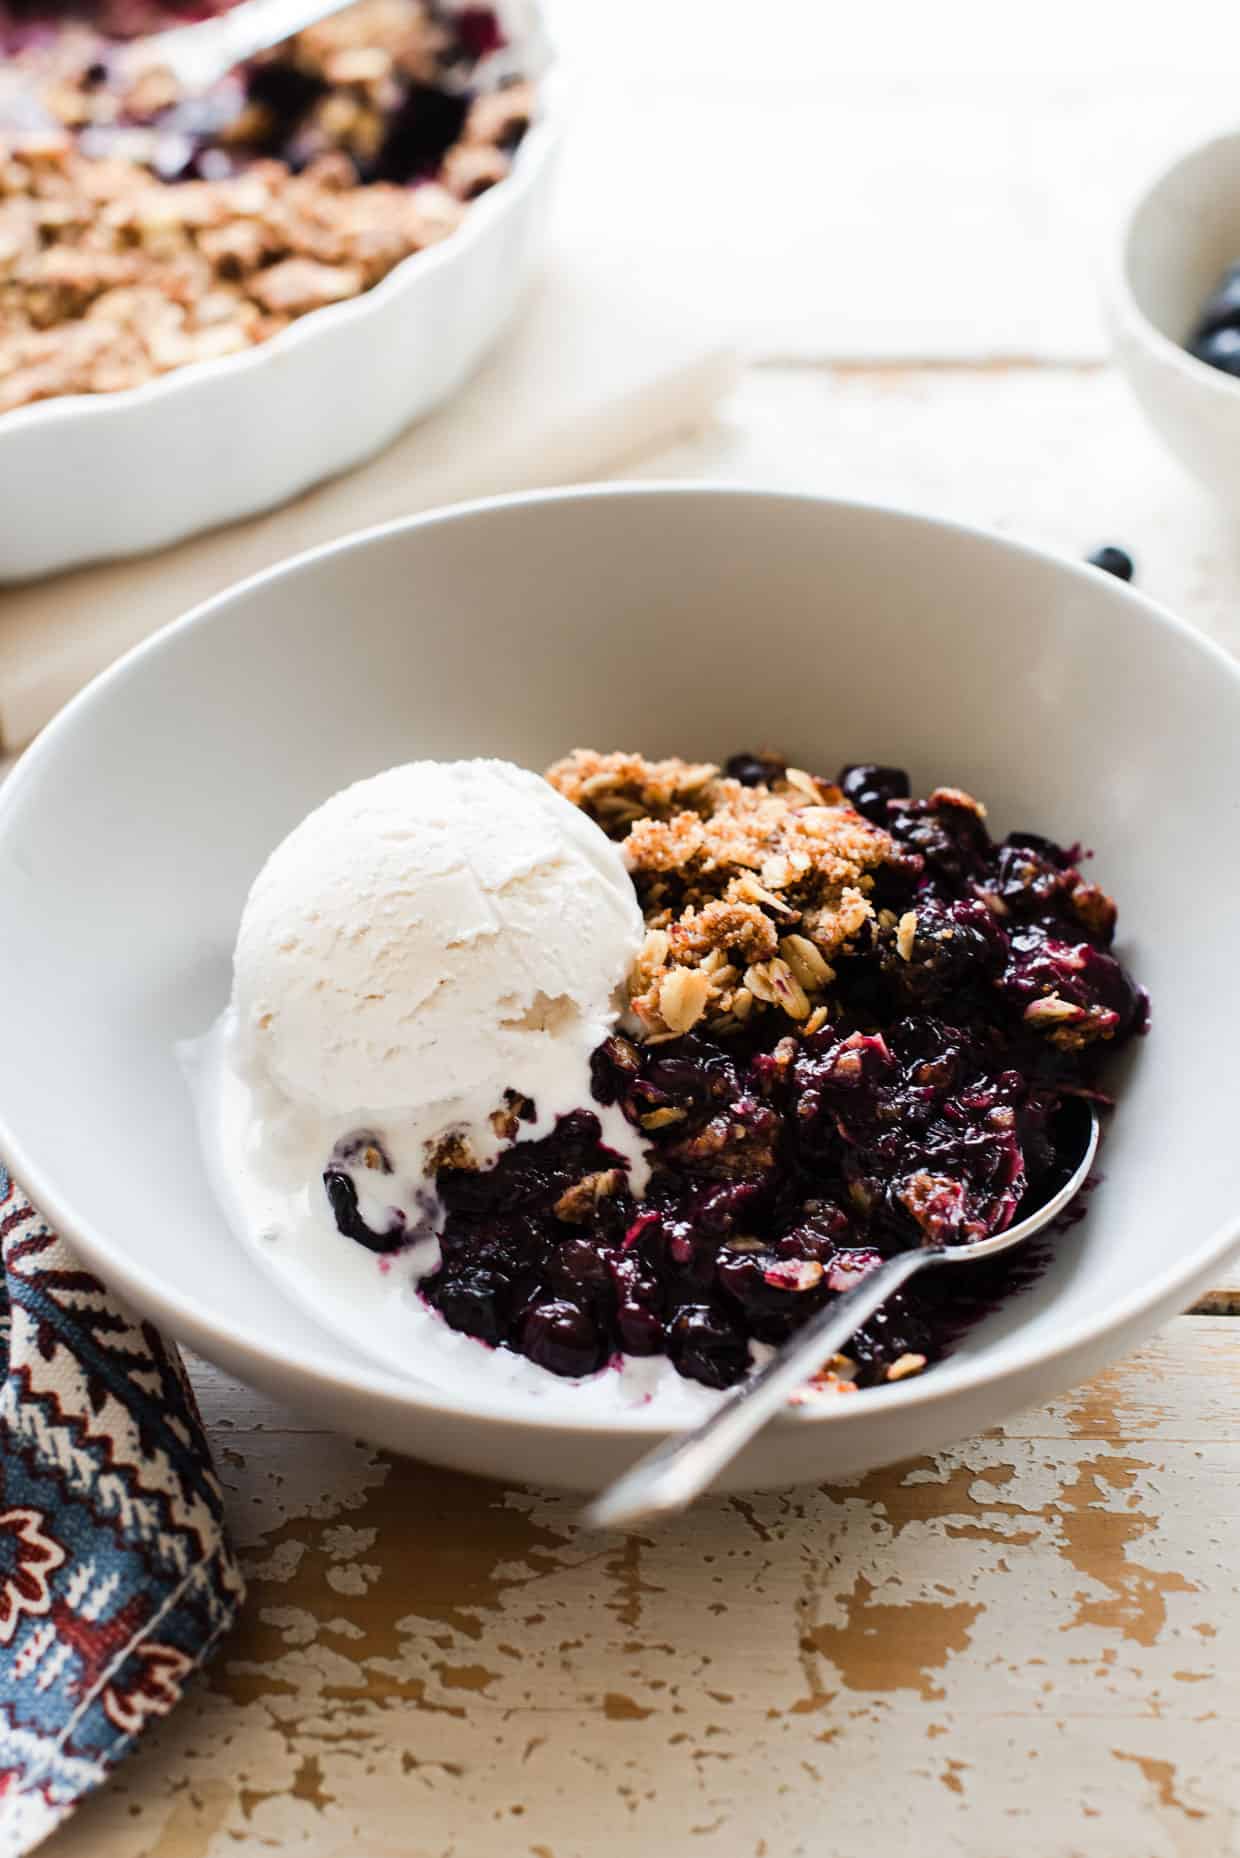 A white bowl filled with blueberry crisp and a scoop of vanilla ice cream on a rustic surface.